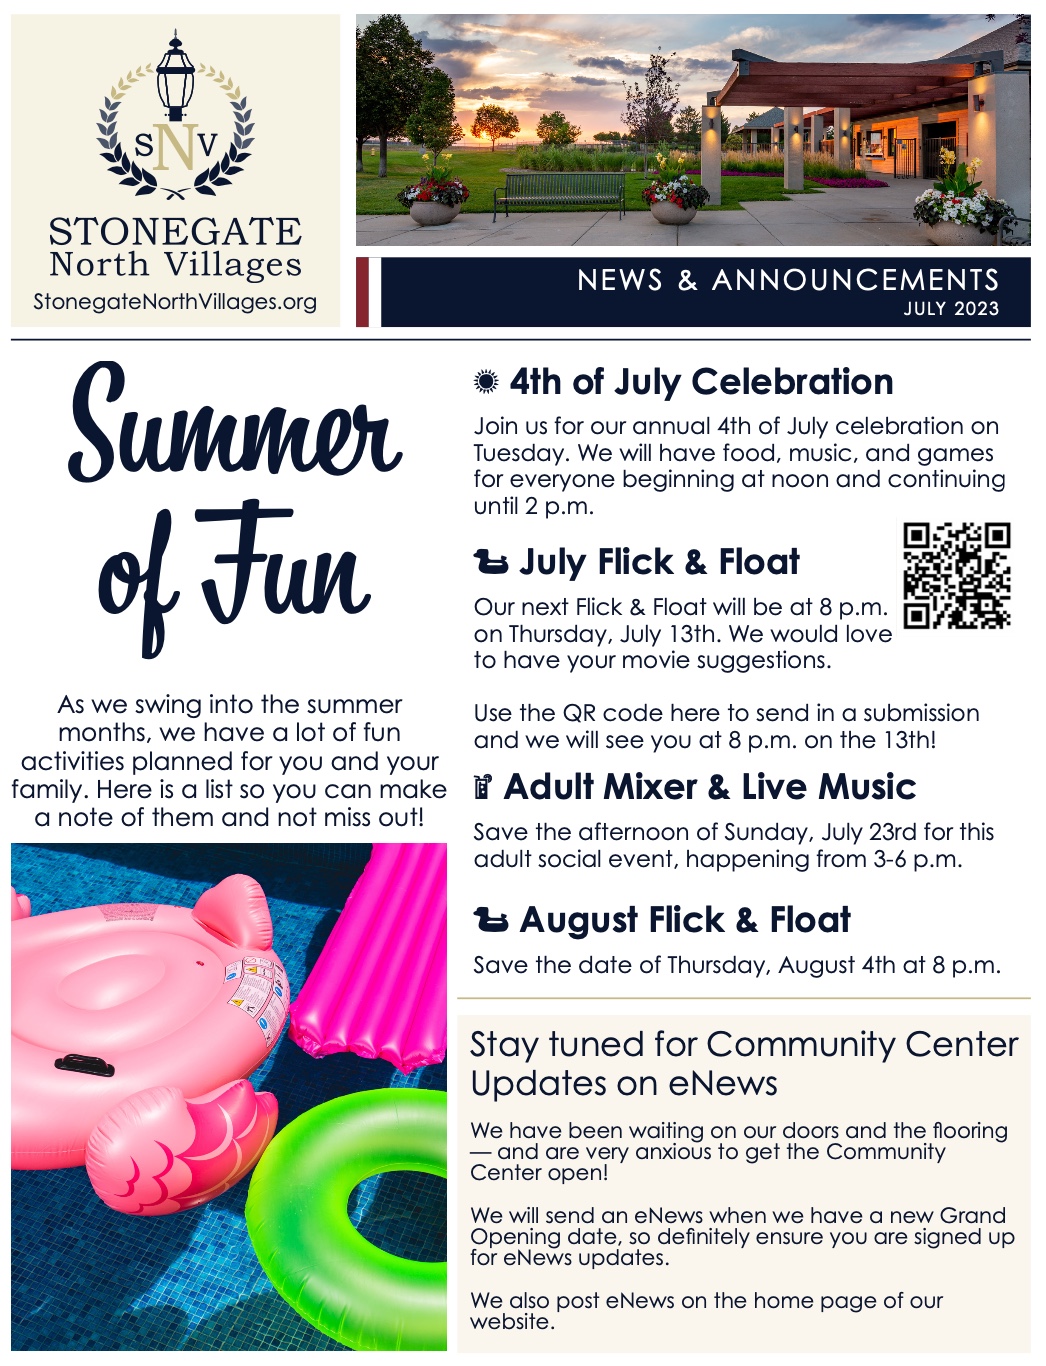 Cover of newsletter with inflatable pool toy image